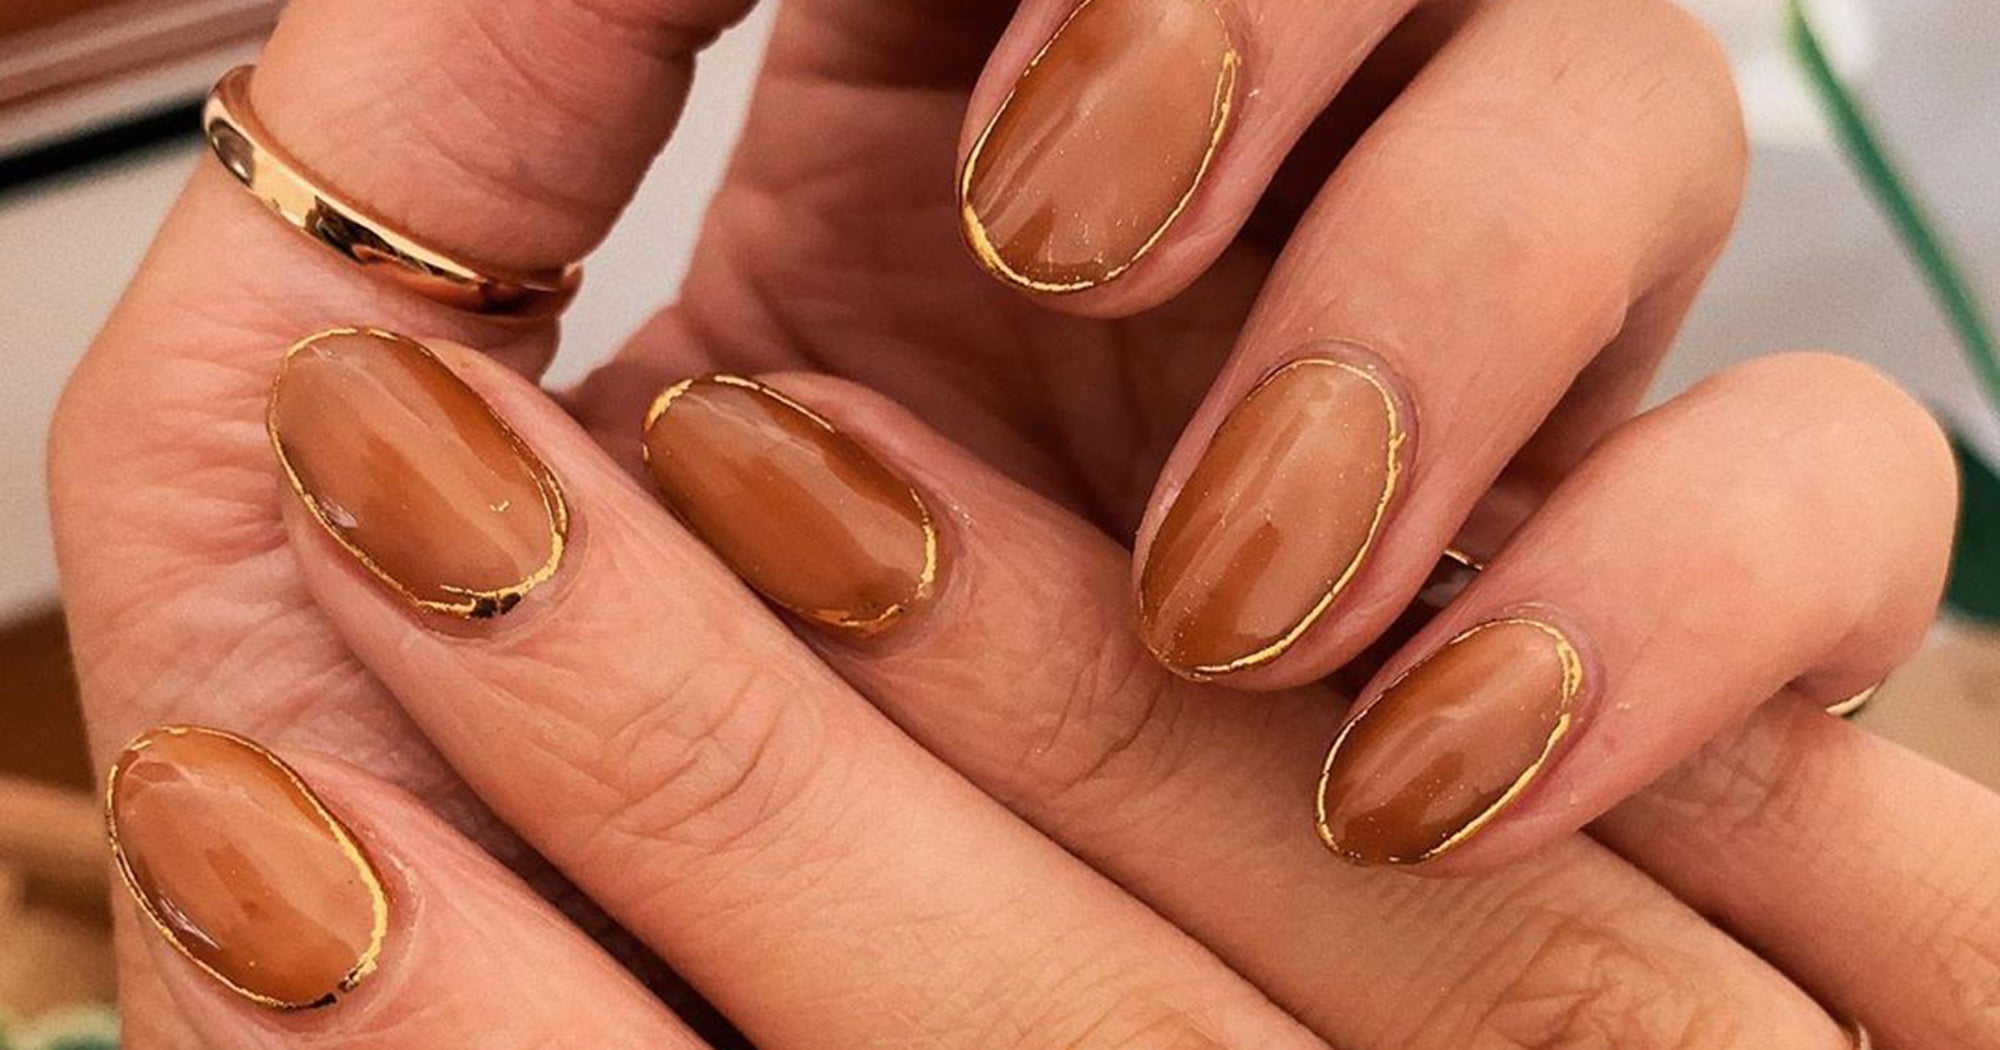 8. Elegant and Chic Nail Art Designs for Special Occasions - wide 9